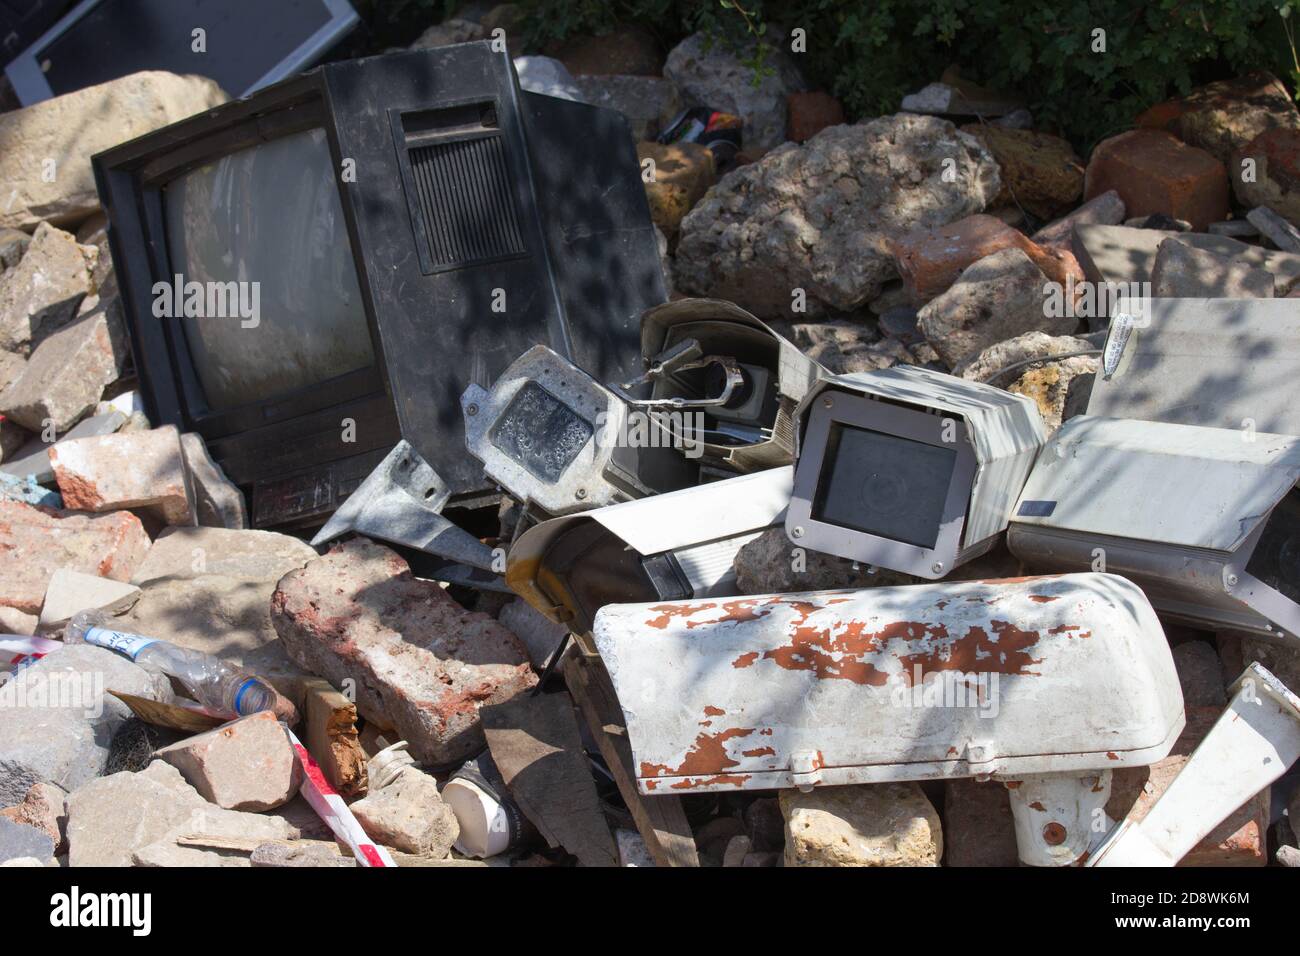 Discarded surveillance cameras and TV monitor amongst rubble.  Comment on dystopian society and possible 'Big Brother' 1984 suggestions. Stock Photo